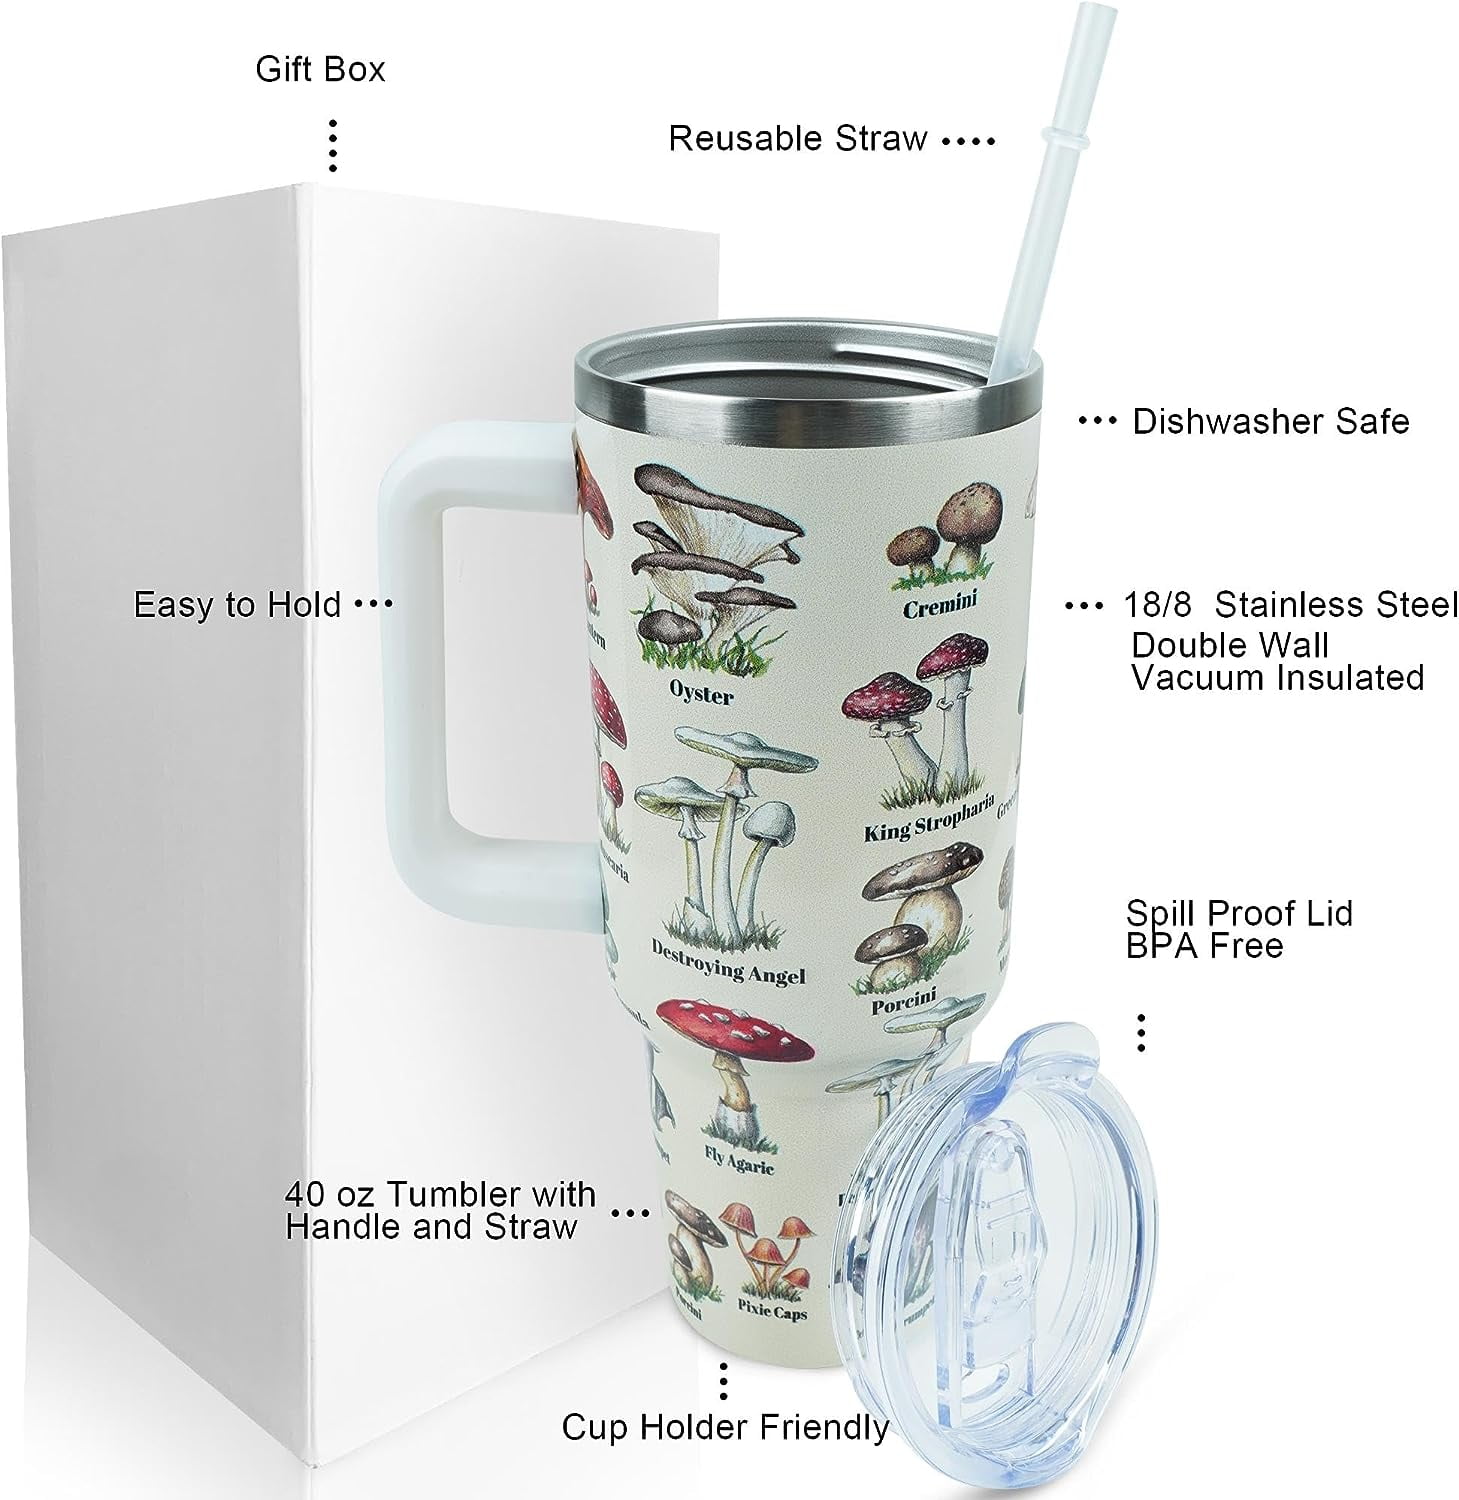 Cool Gear 3-Pack Modern Tumbler with Reusable Straw | Dishwasher Safe, Cup  Holder Friendly, Spillproof, Double-Wall Insulated Travel Tumbler | Printed